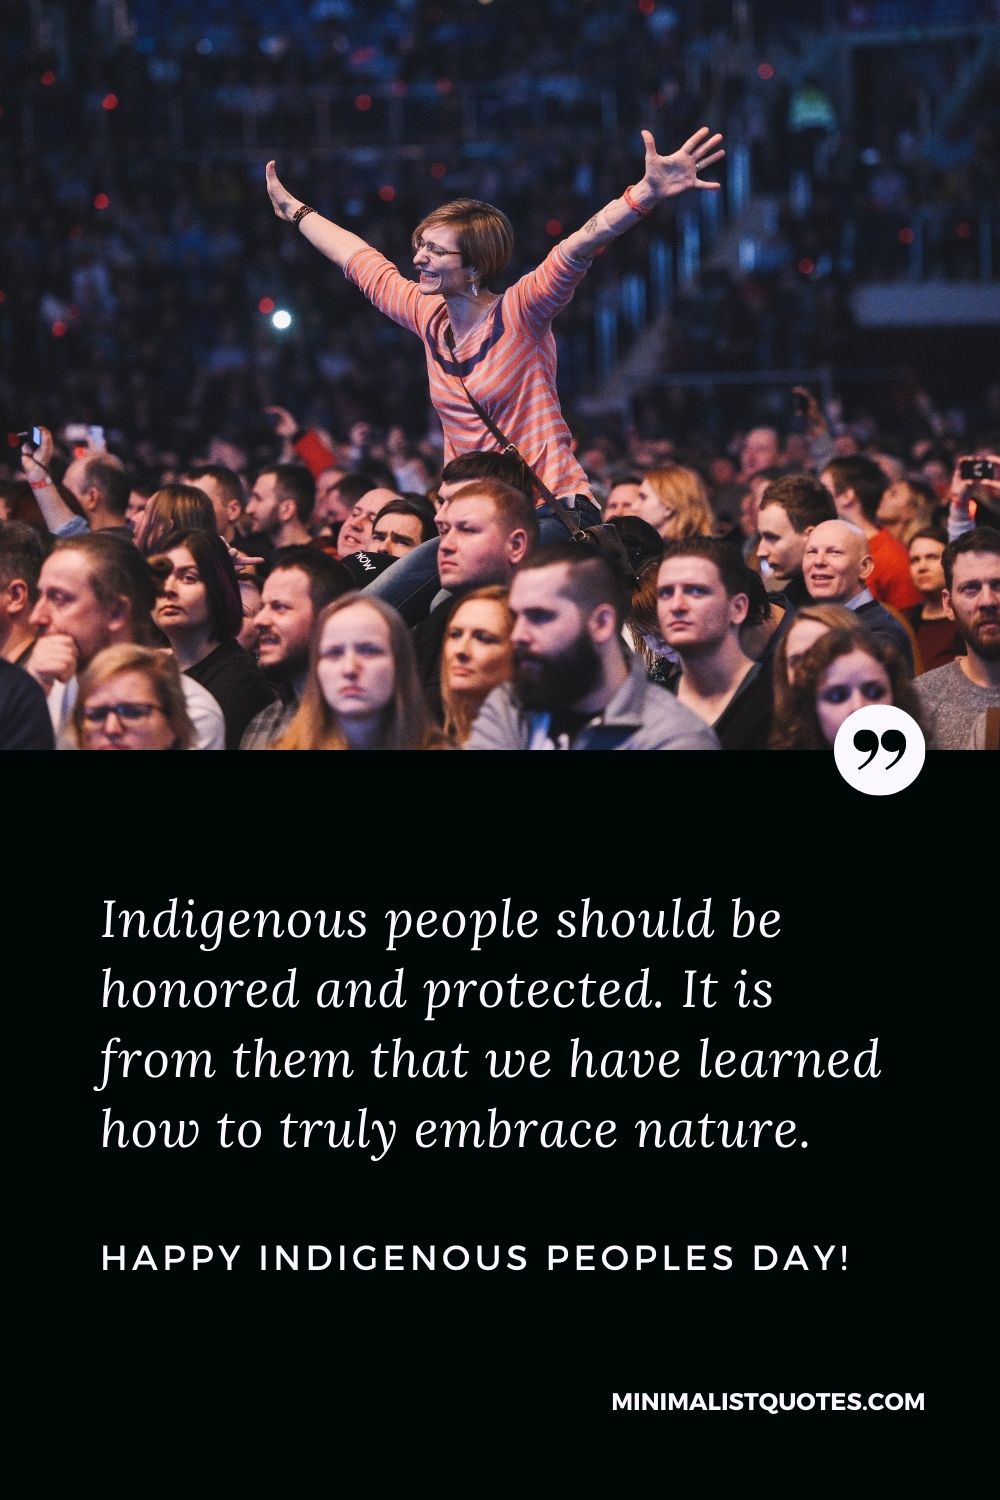 Indigenous Peoples Day Quote, Wish & Message With Image: Indigenous people should be honored and protected. It is from them that we have learned how to truly embrace nature. Happy Indigenous Peoples Day!